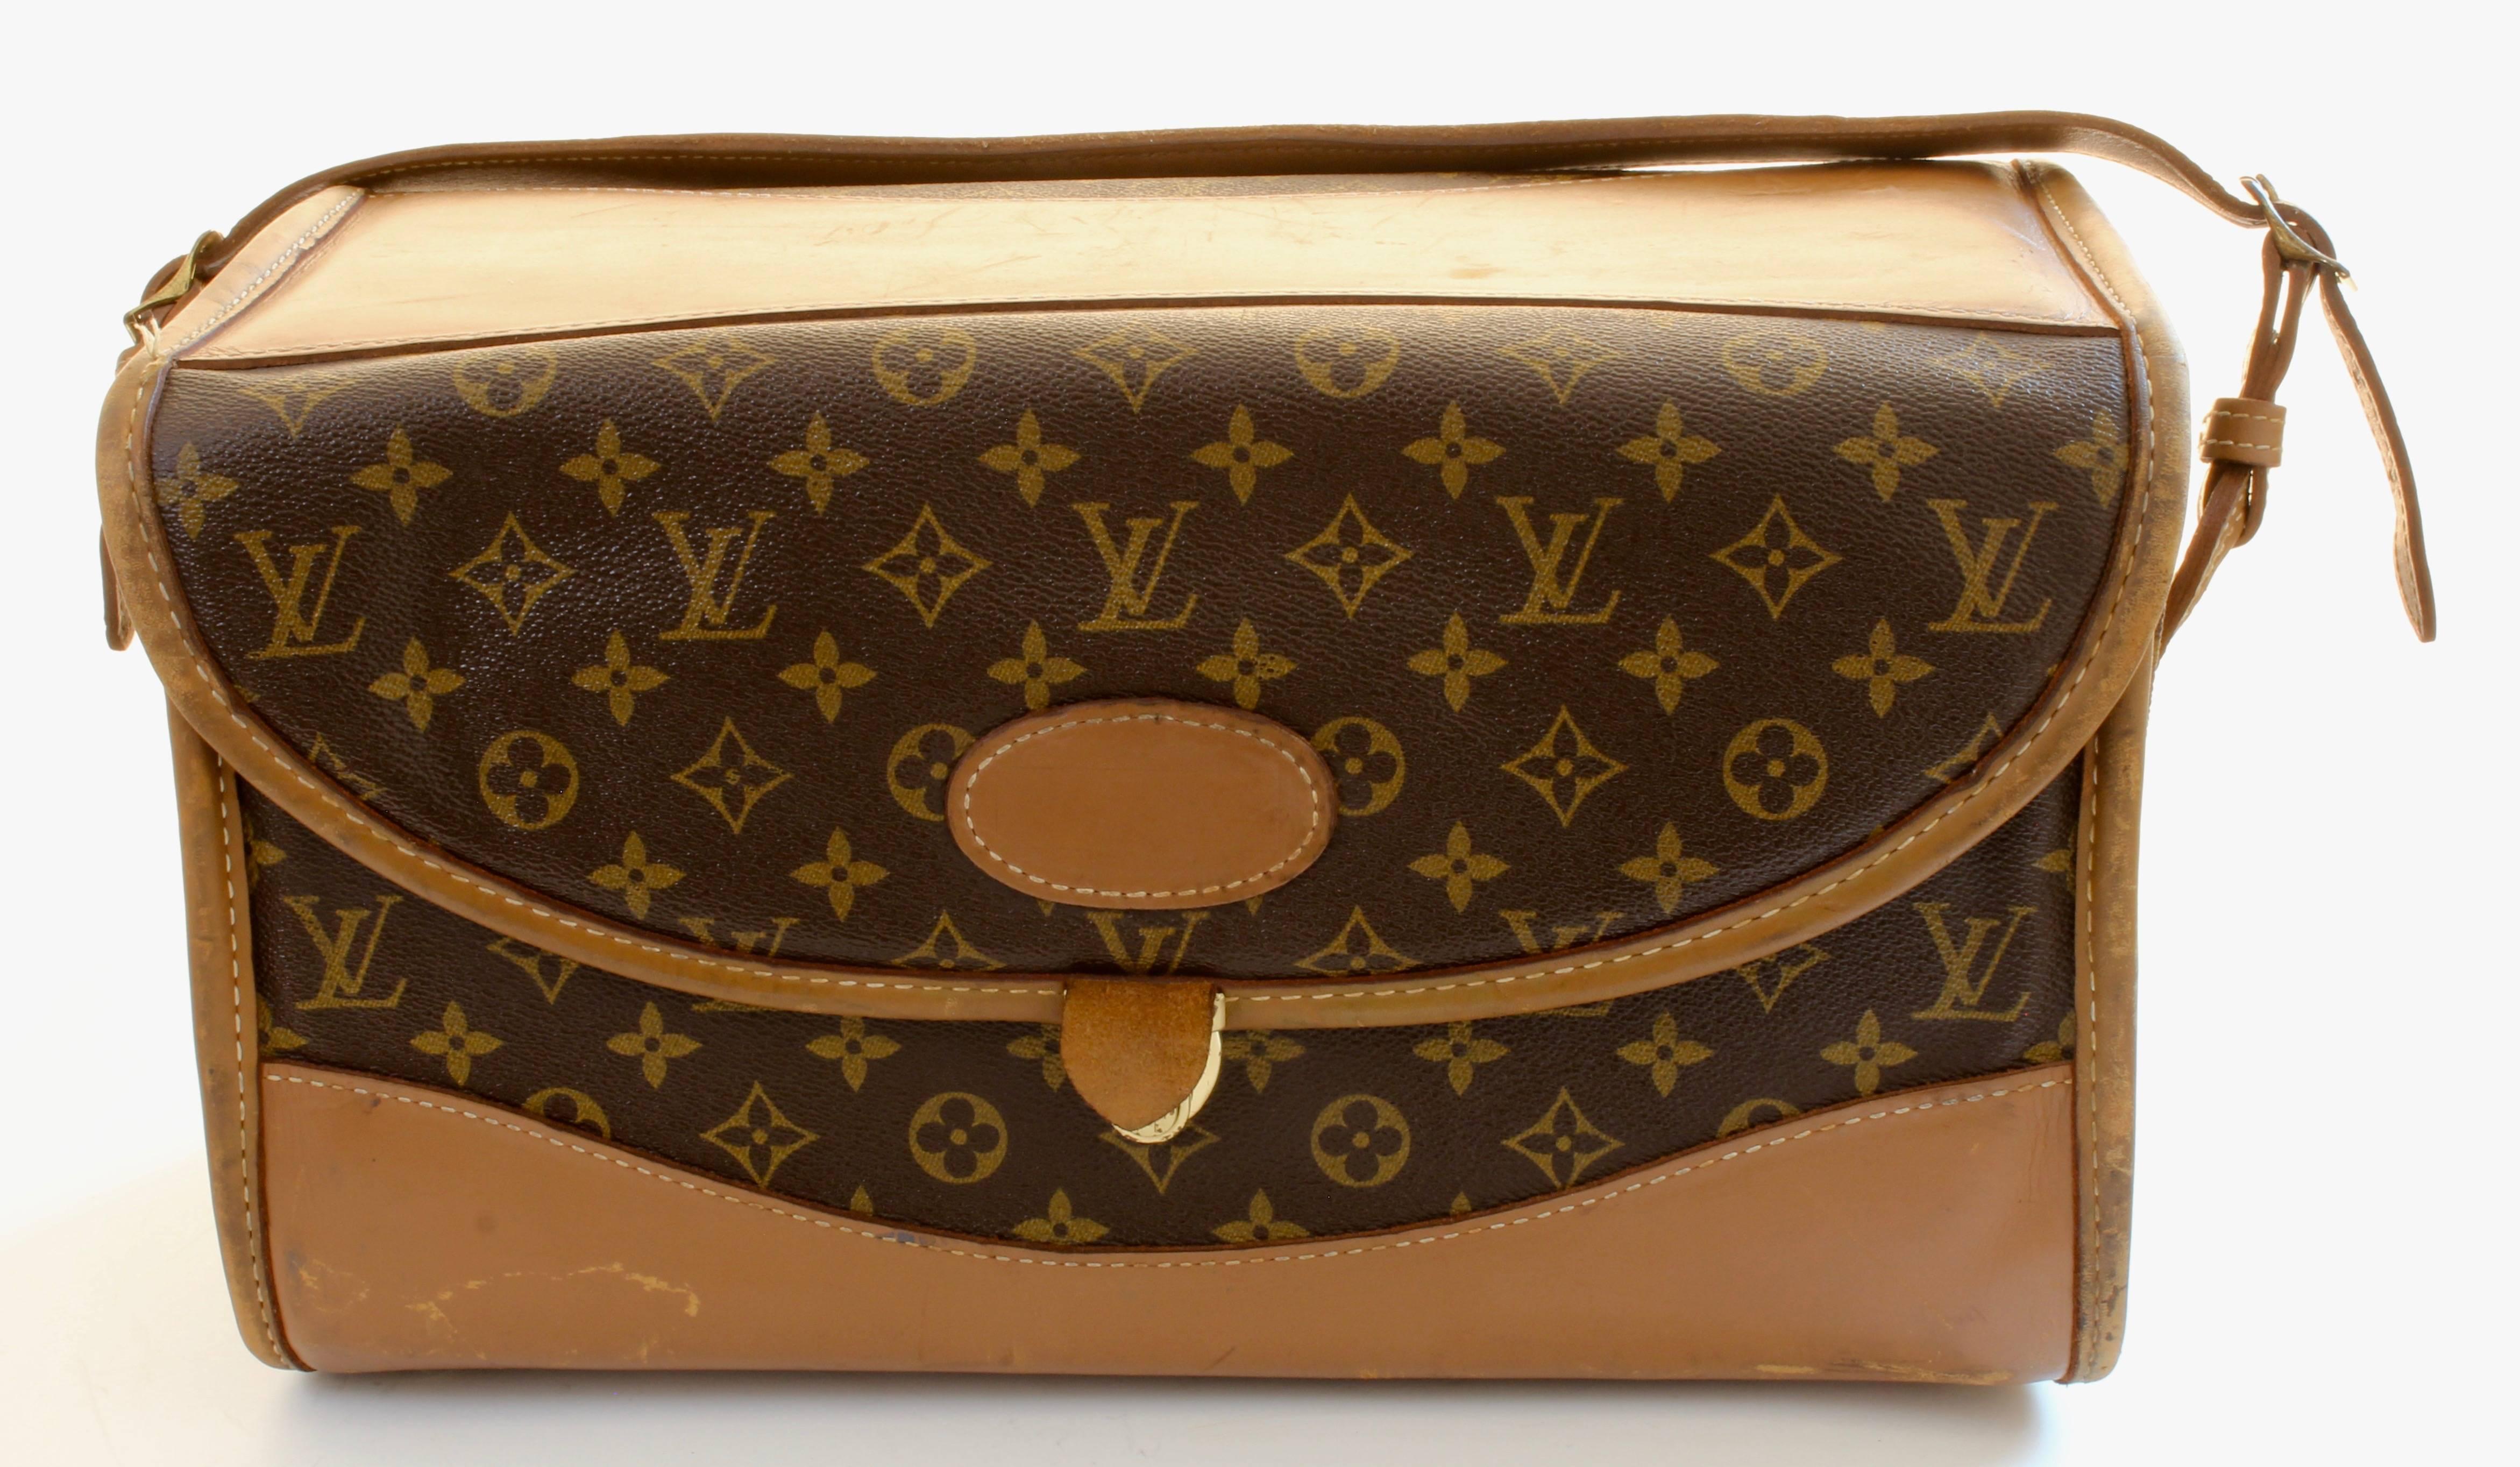 Travel in style with this chic beauty or train case, made in the 70s by The French Company under special license from Louis Vuitton, long before LV had a boutique presence in the USA. Sold in stores such as Saks and Neiman's, these LV x FC bags were